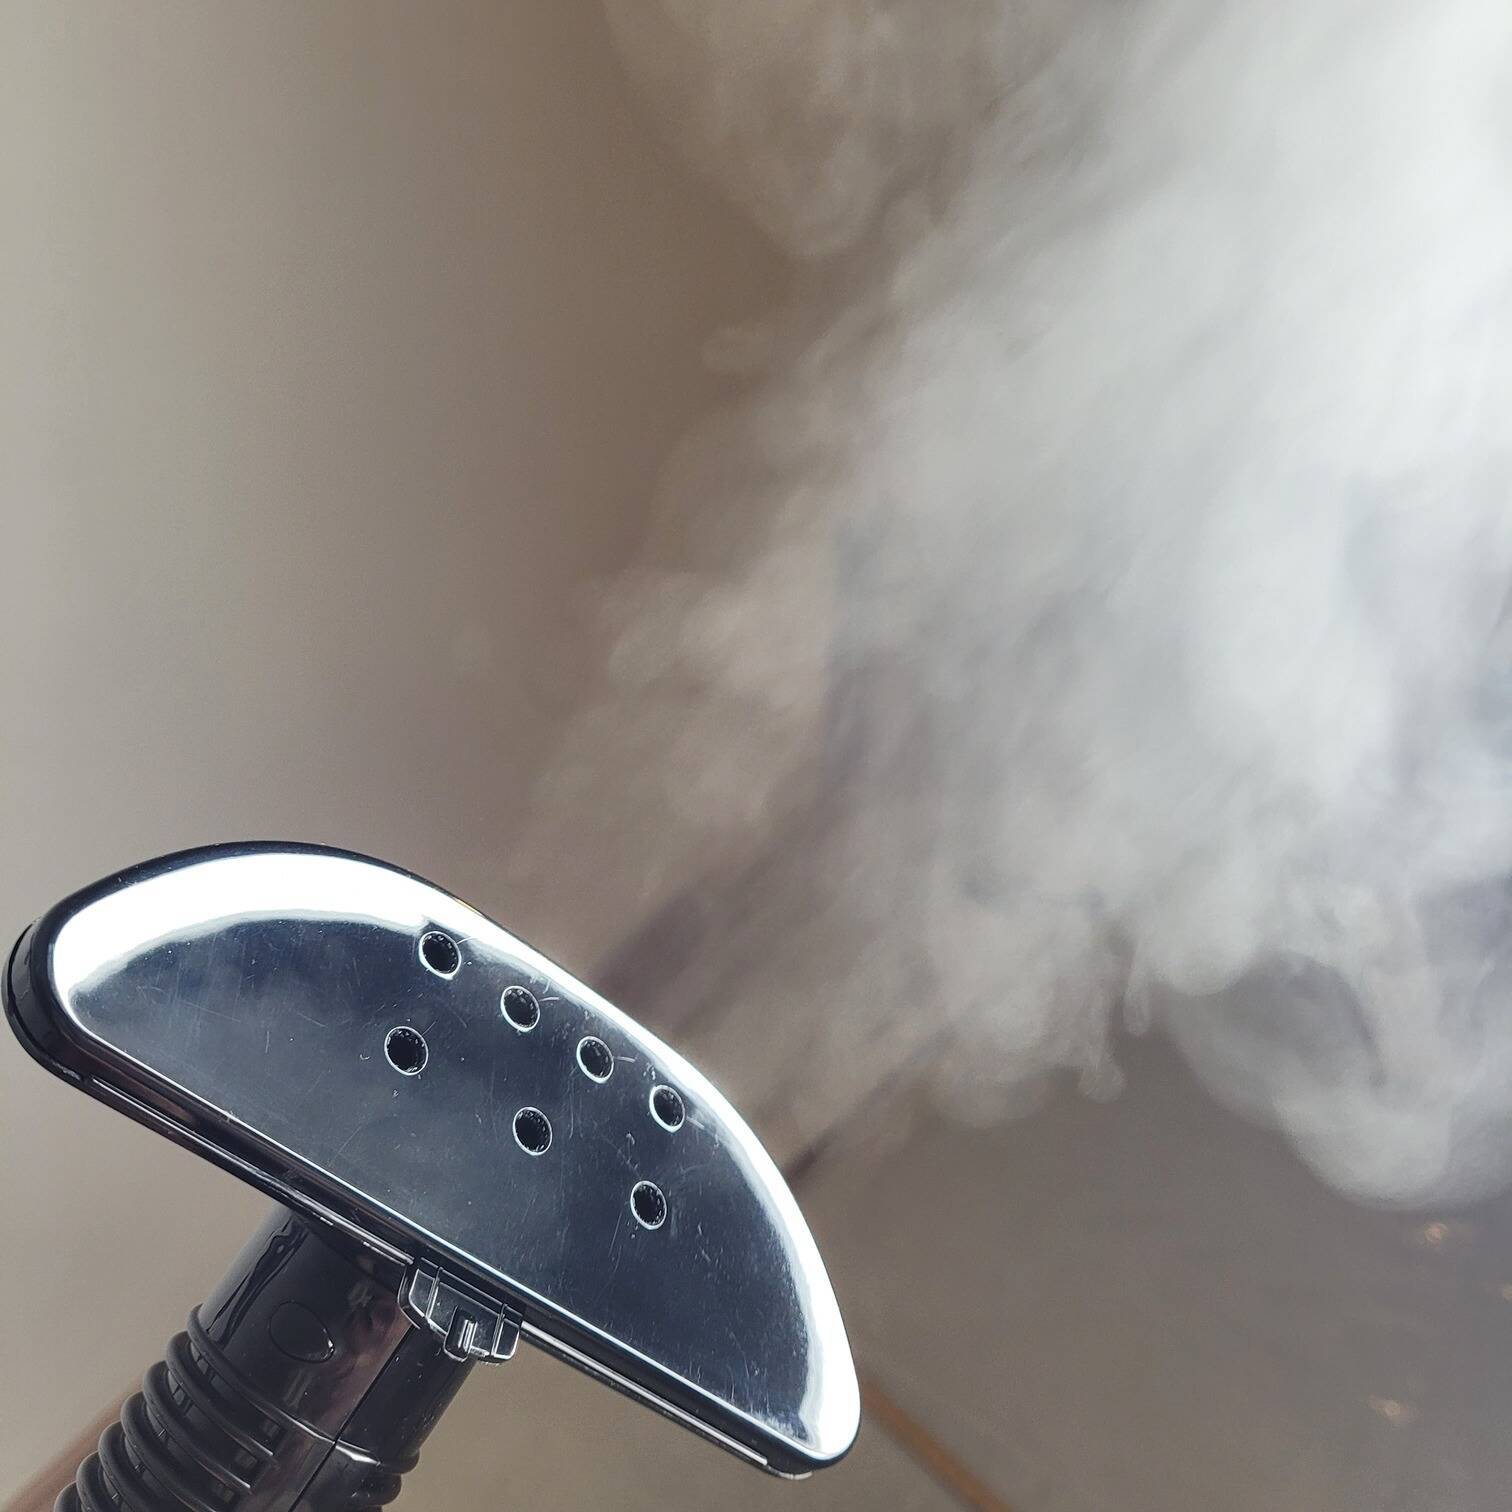 a photo of a steamer emitting hot white steam into the air